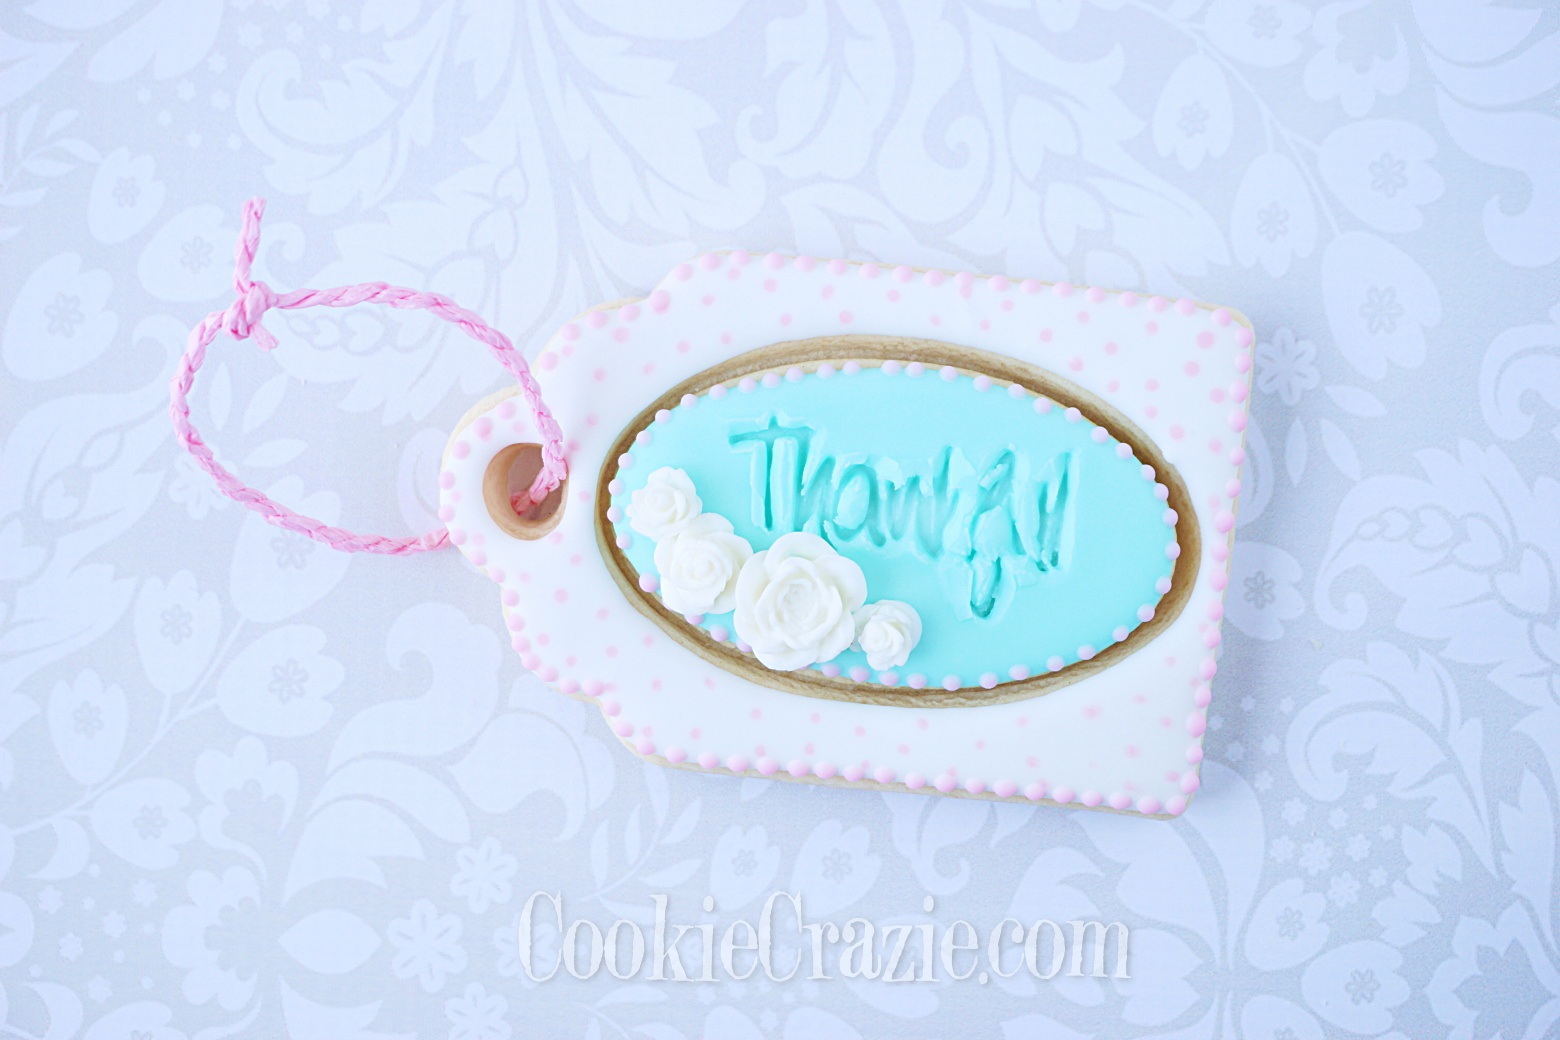  Thankful Gift Tag Decorated Sugar Cookie YouTube video  HERE  